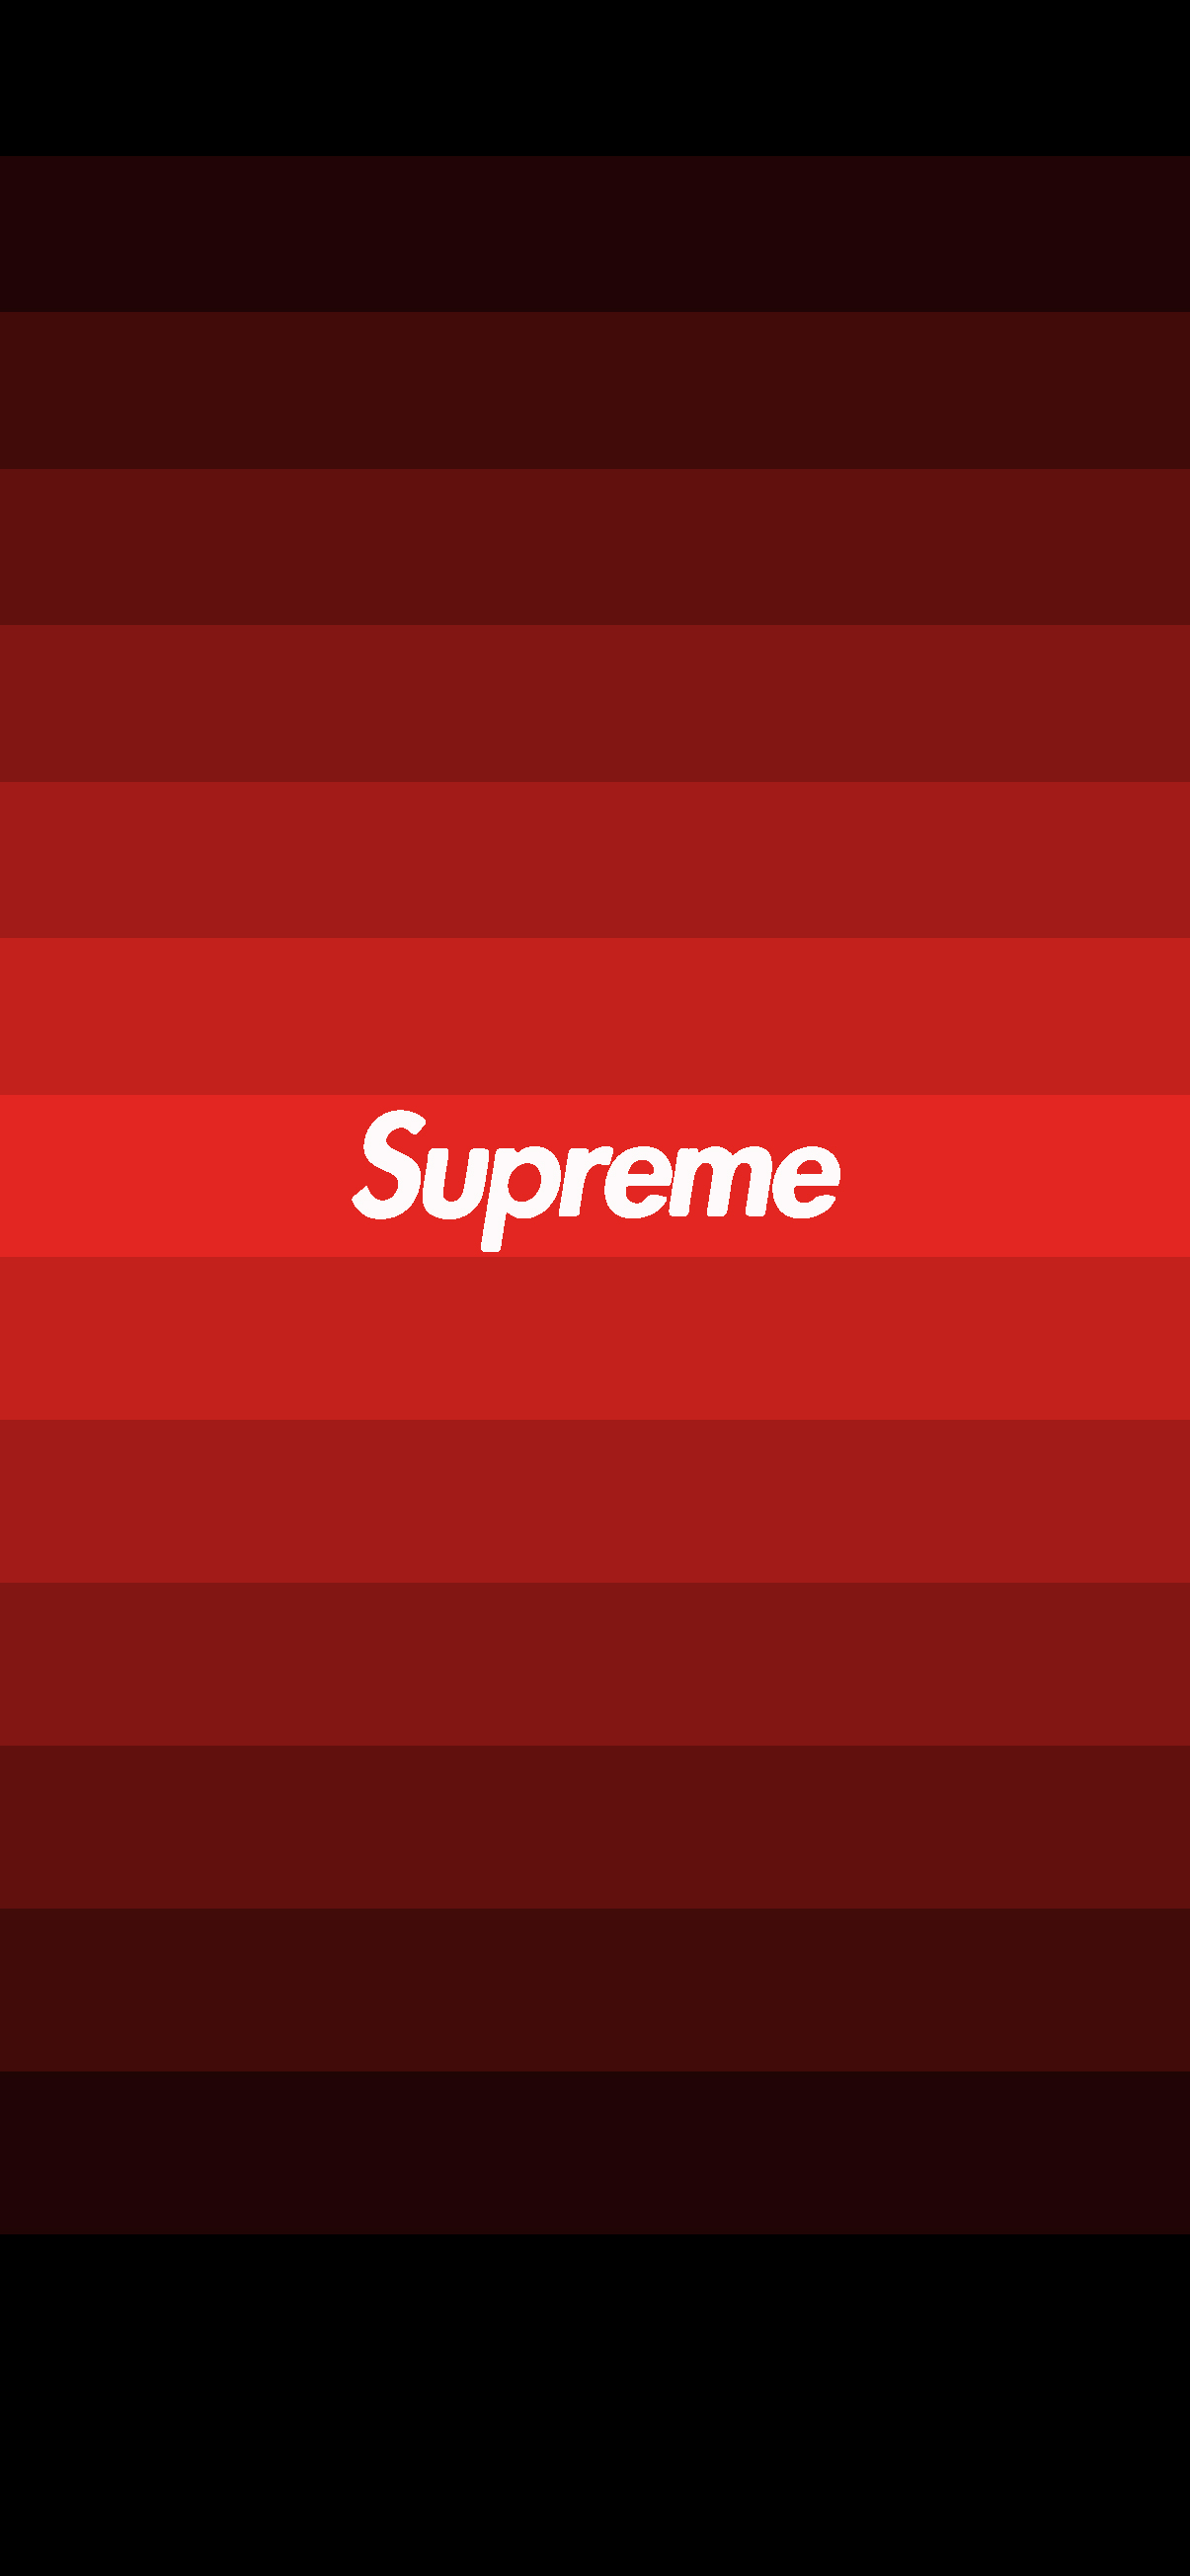 Supreme wallpaper black and red | WallpaperiZe - Phone Wallpapers